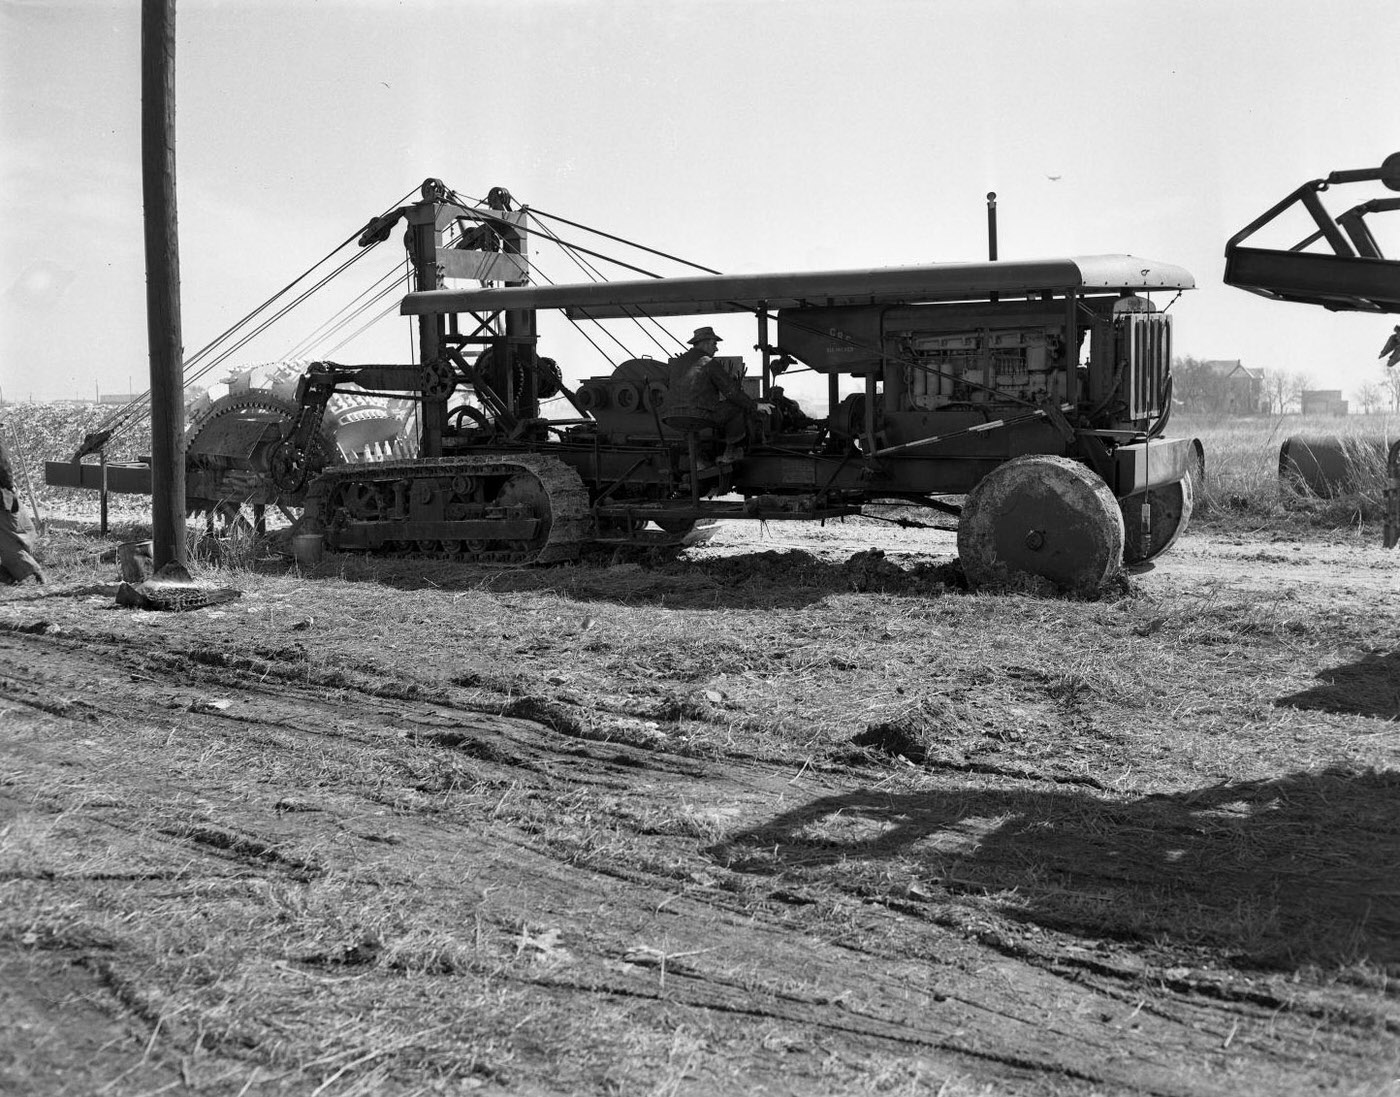 Trench-Digging Machinery in Action on a Field, 1951.